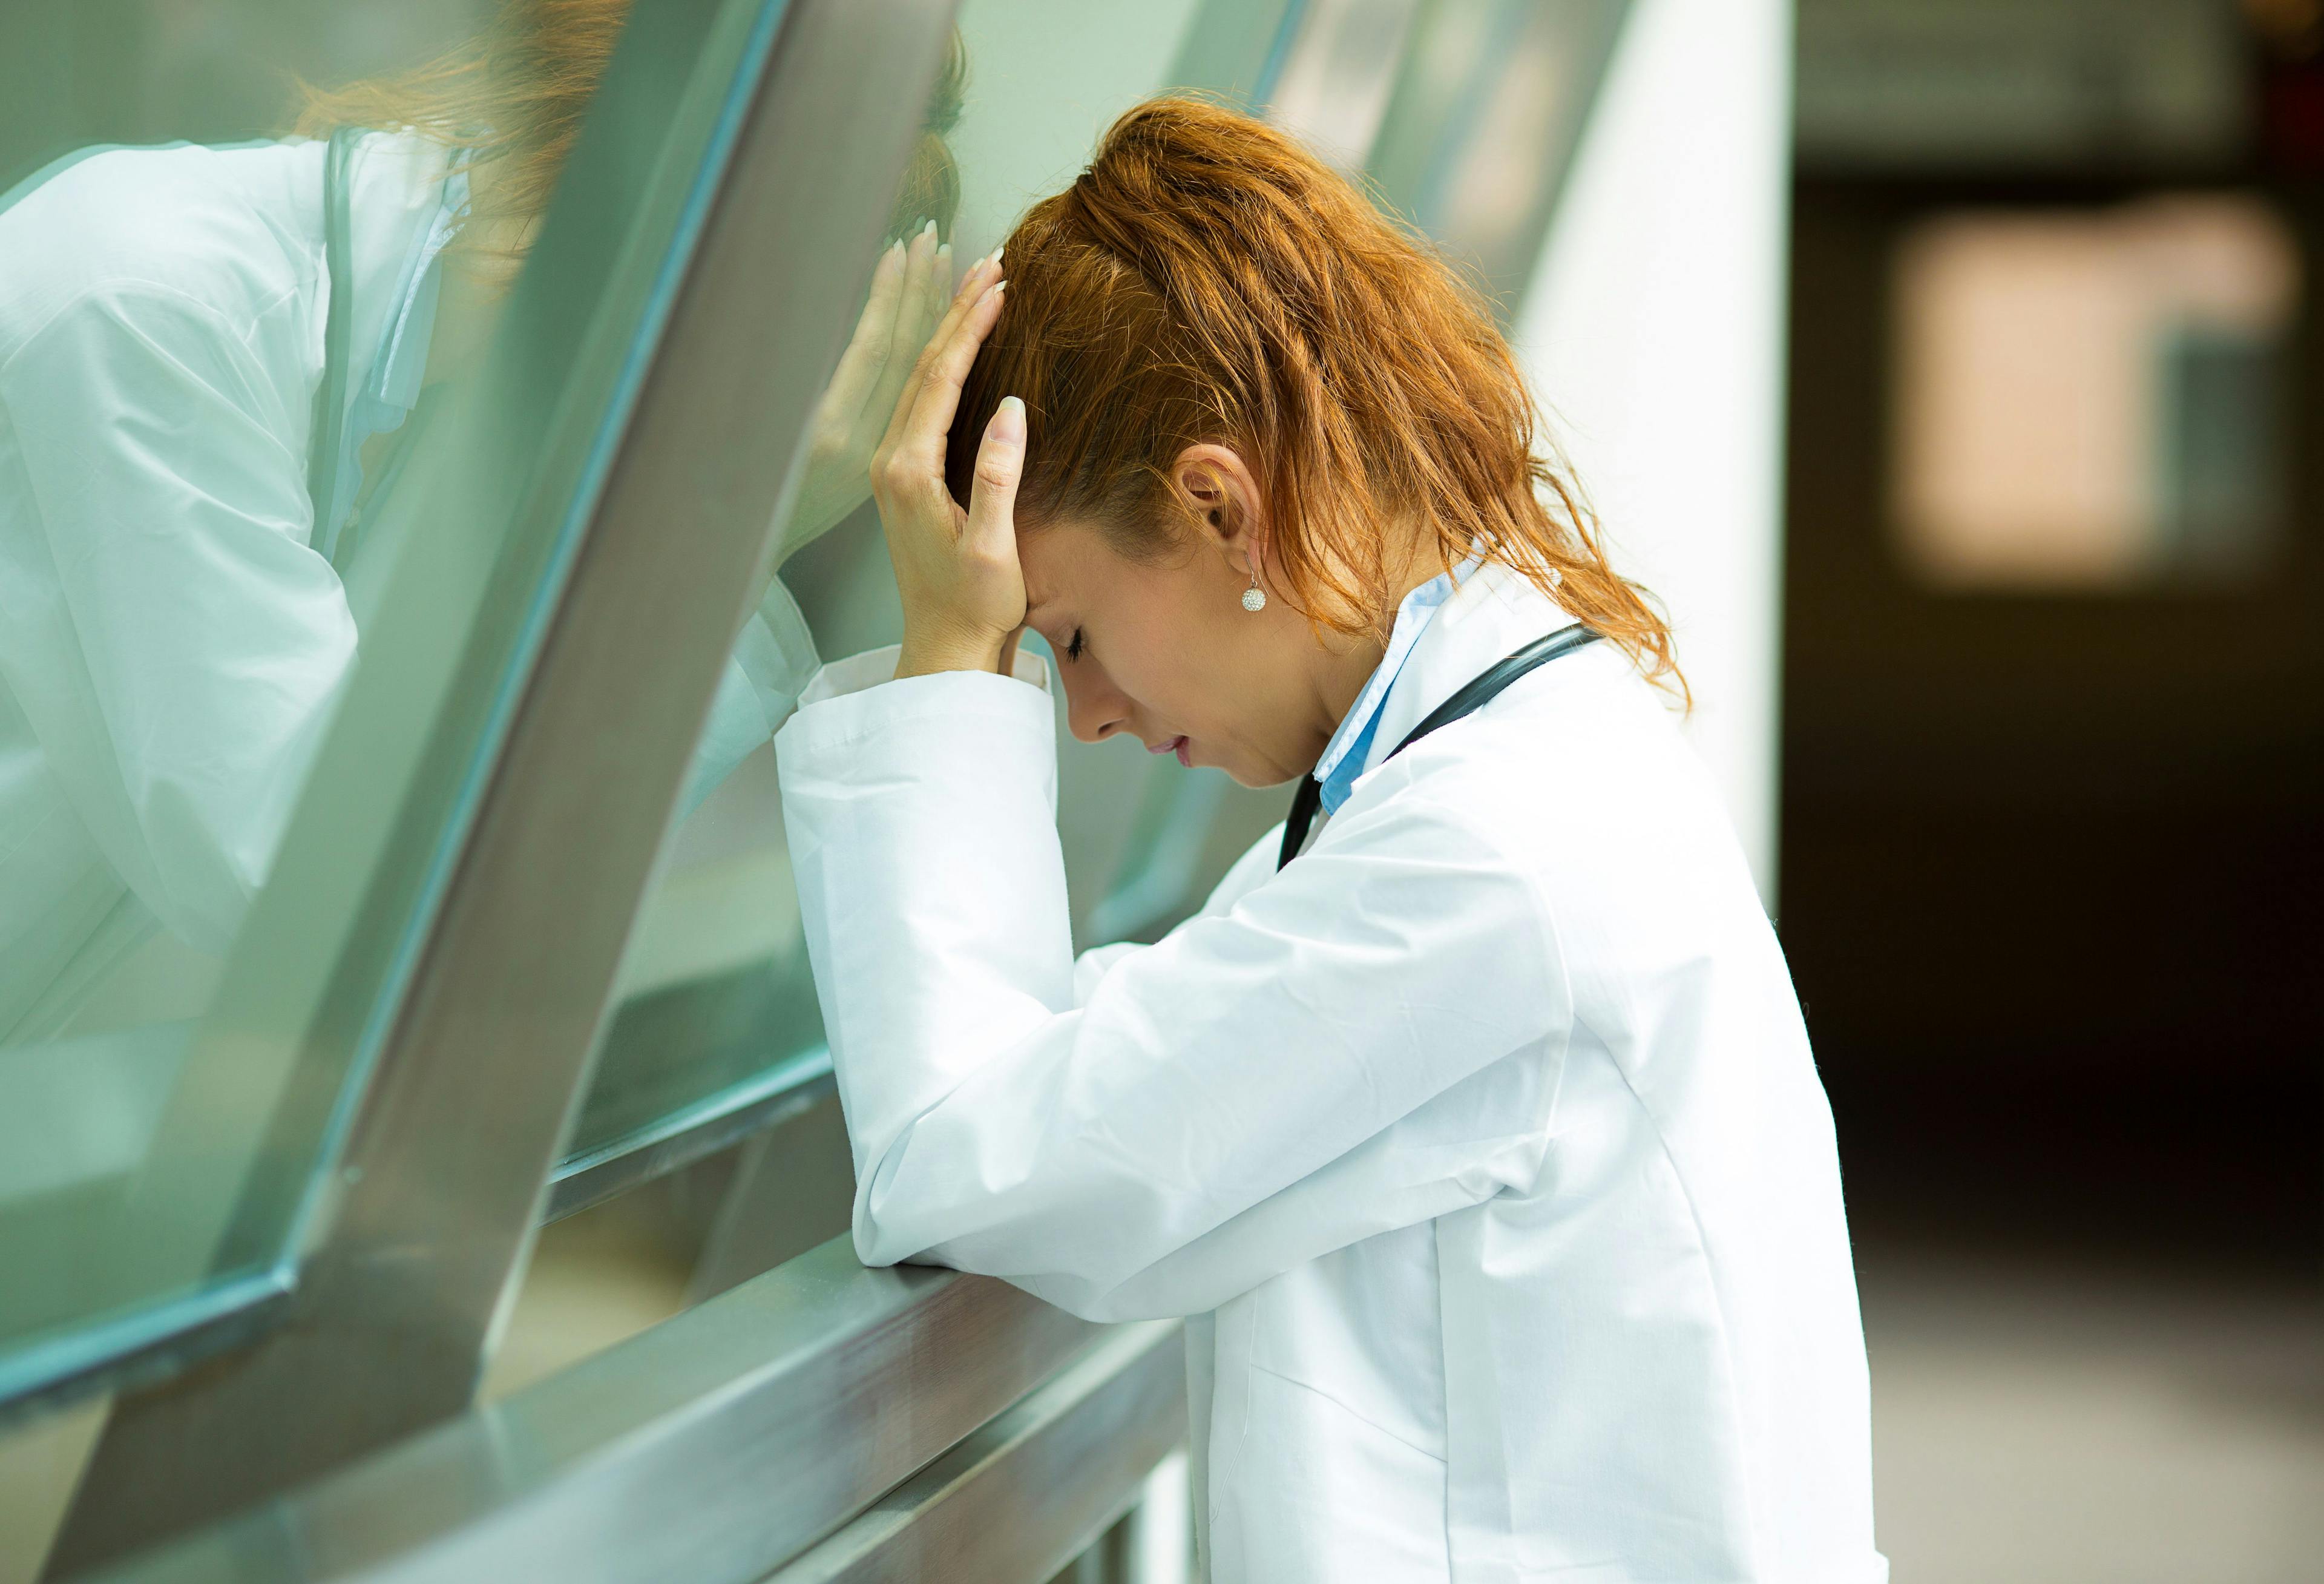 Burnout can be a problem for physicians. (Images courtesy of Adobe Stock)